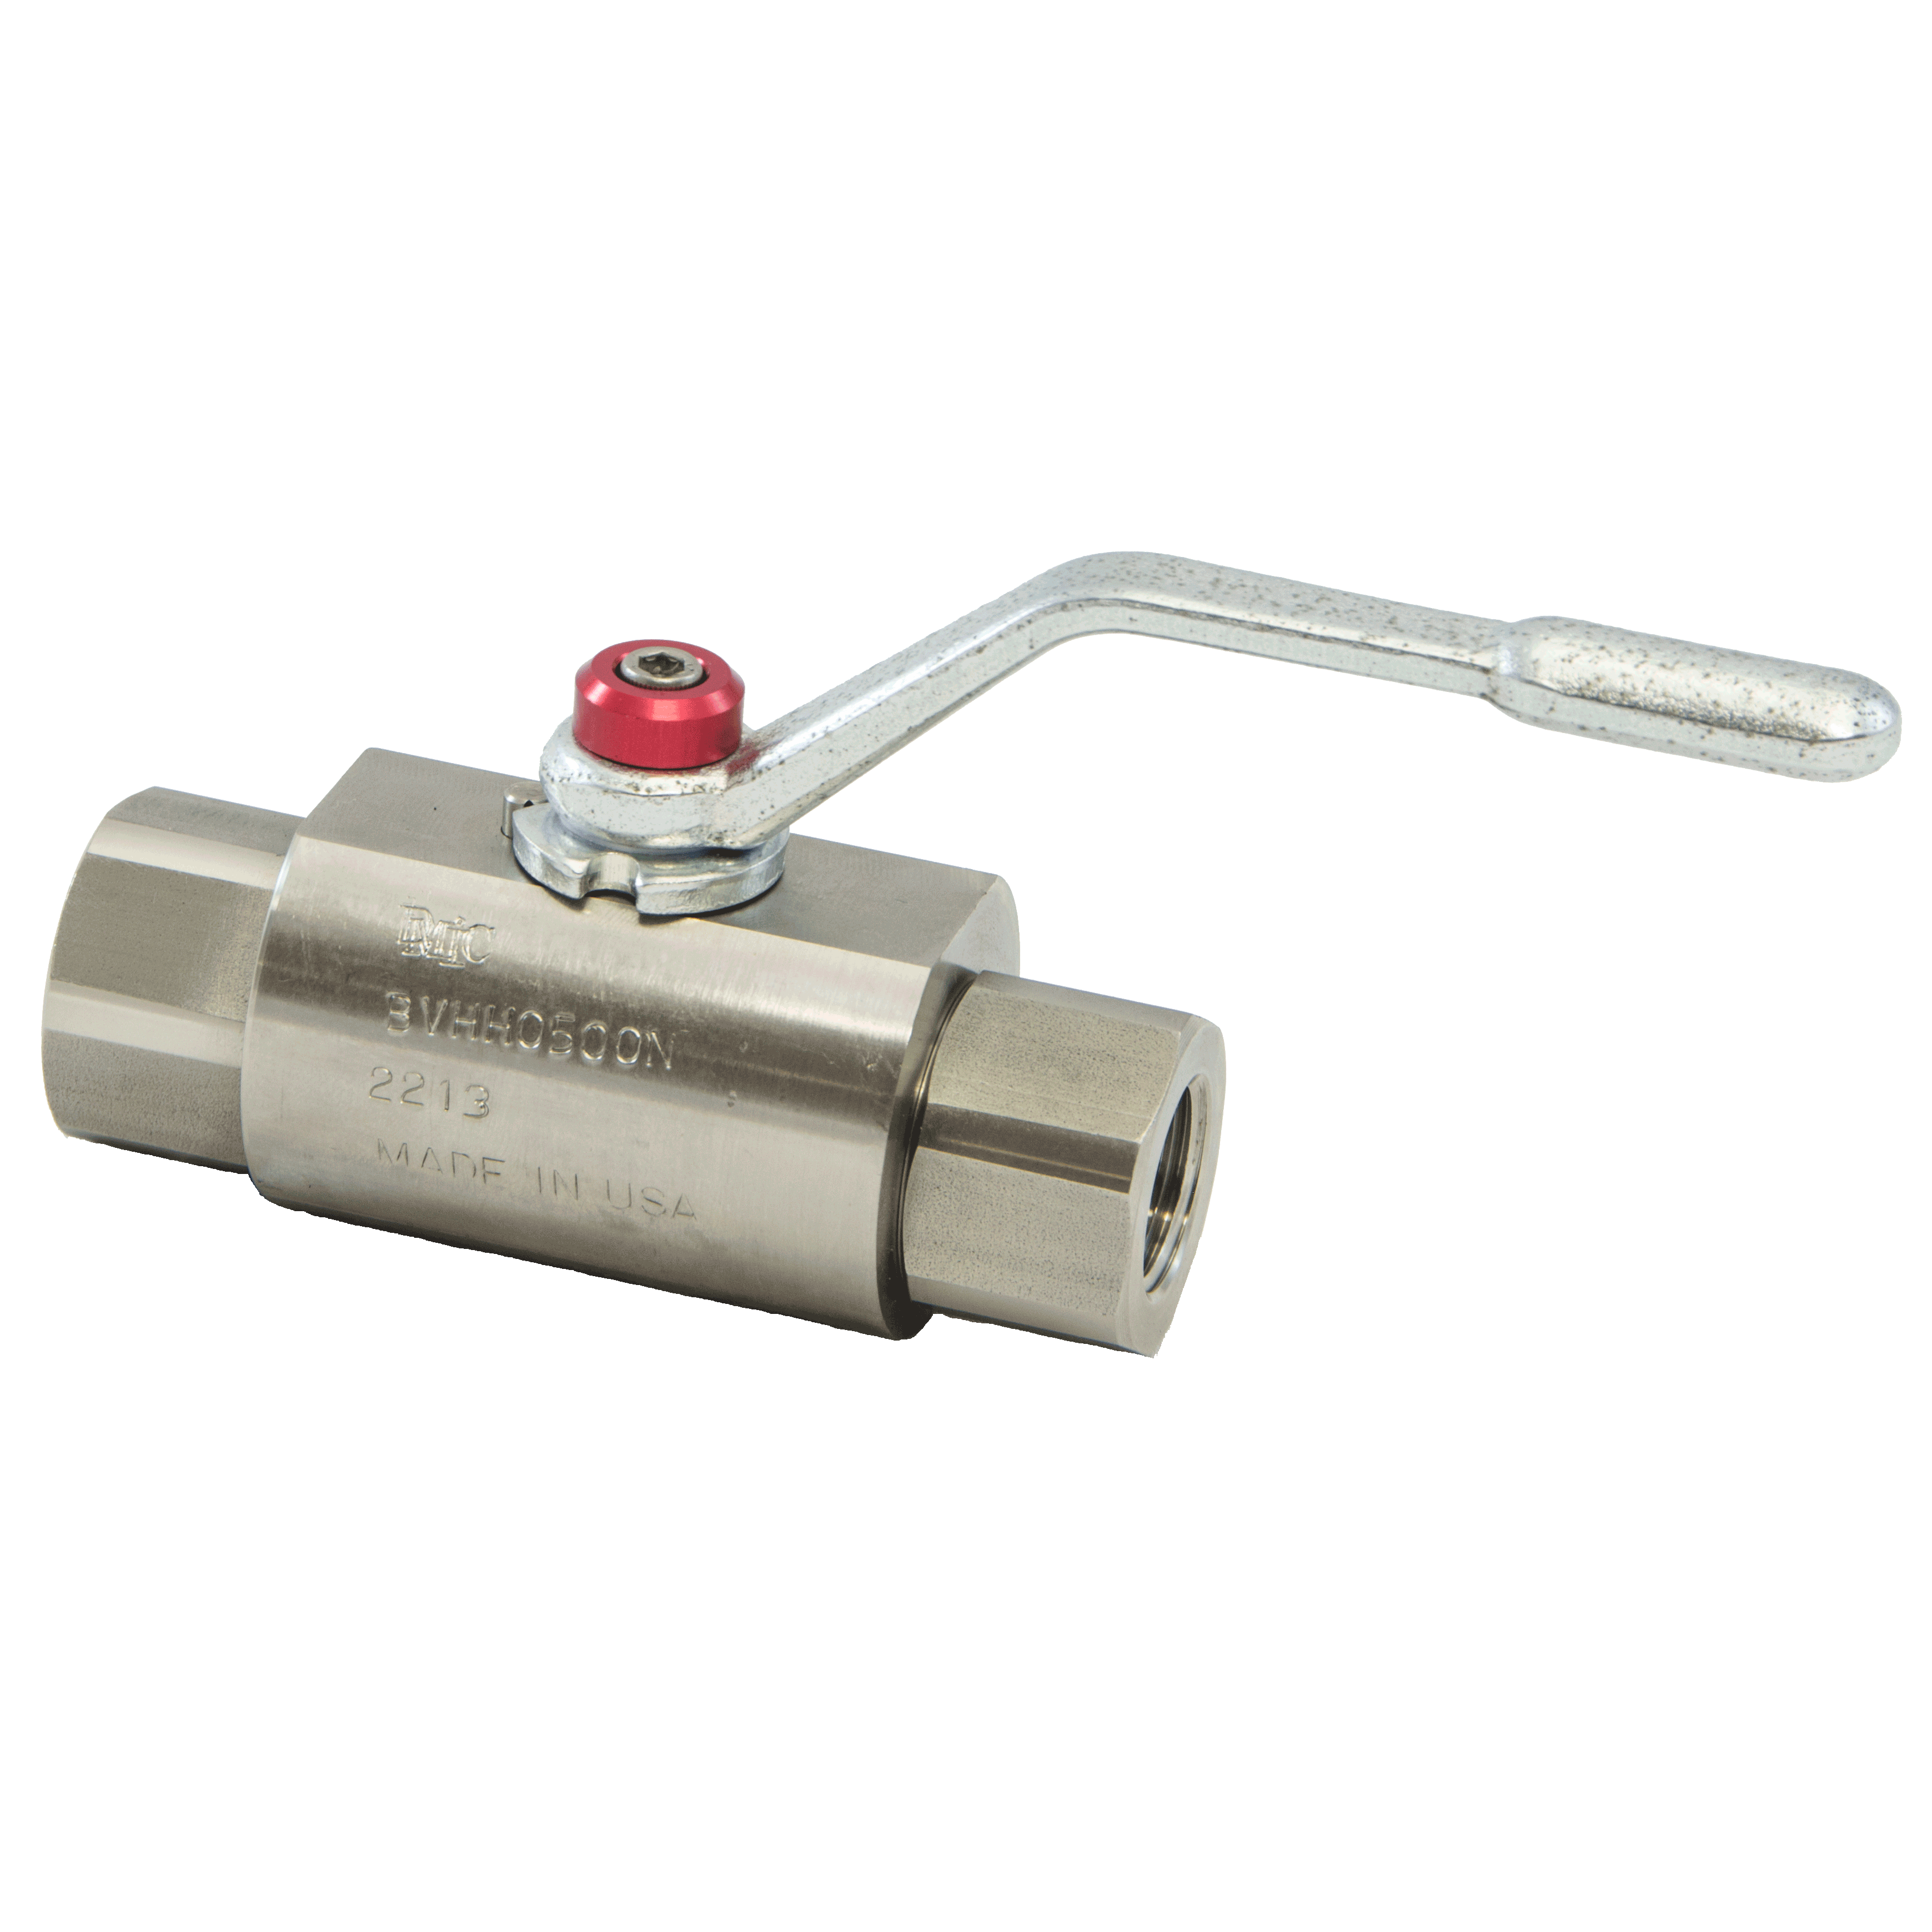 BVHH-0500S-1111 : DMIC Super High Pressure Ball Valve, #8 SAE (1/2), Carbon Steel, 10000psi, Two-Way